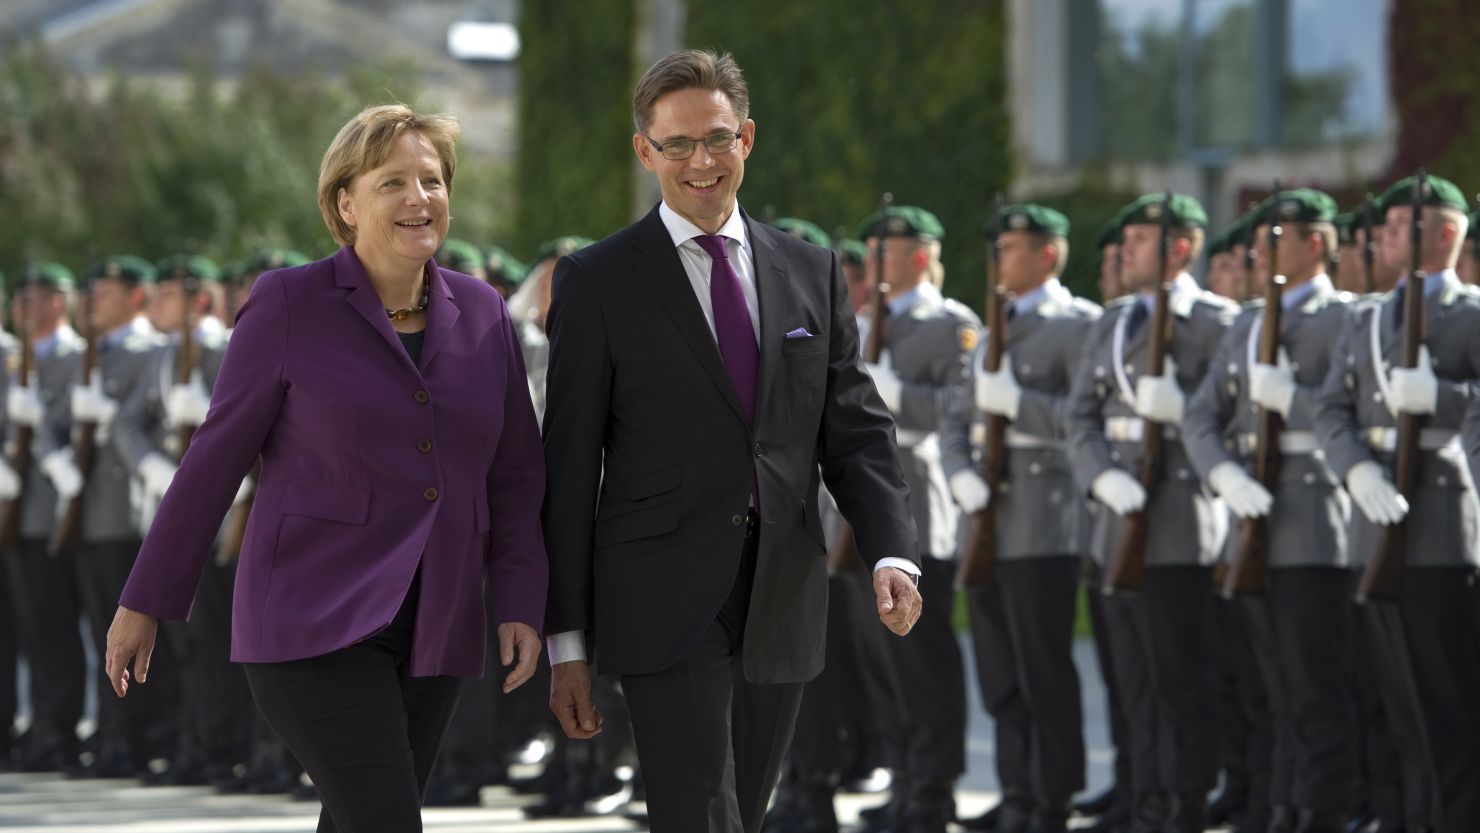 German Chancellor Angela Merkel (L) and Finland's Prime Minister Jyrki Katainen inspects the guard of honour before their meeting at the Chancellery in Berlin on September 13 , 2011.